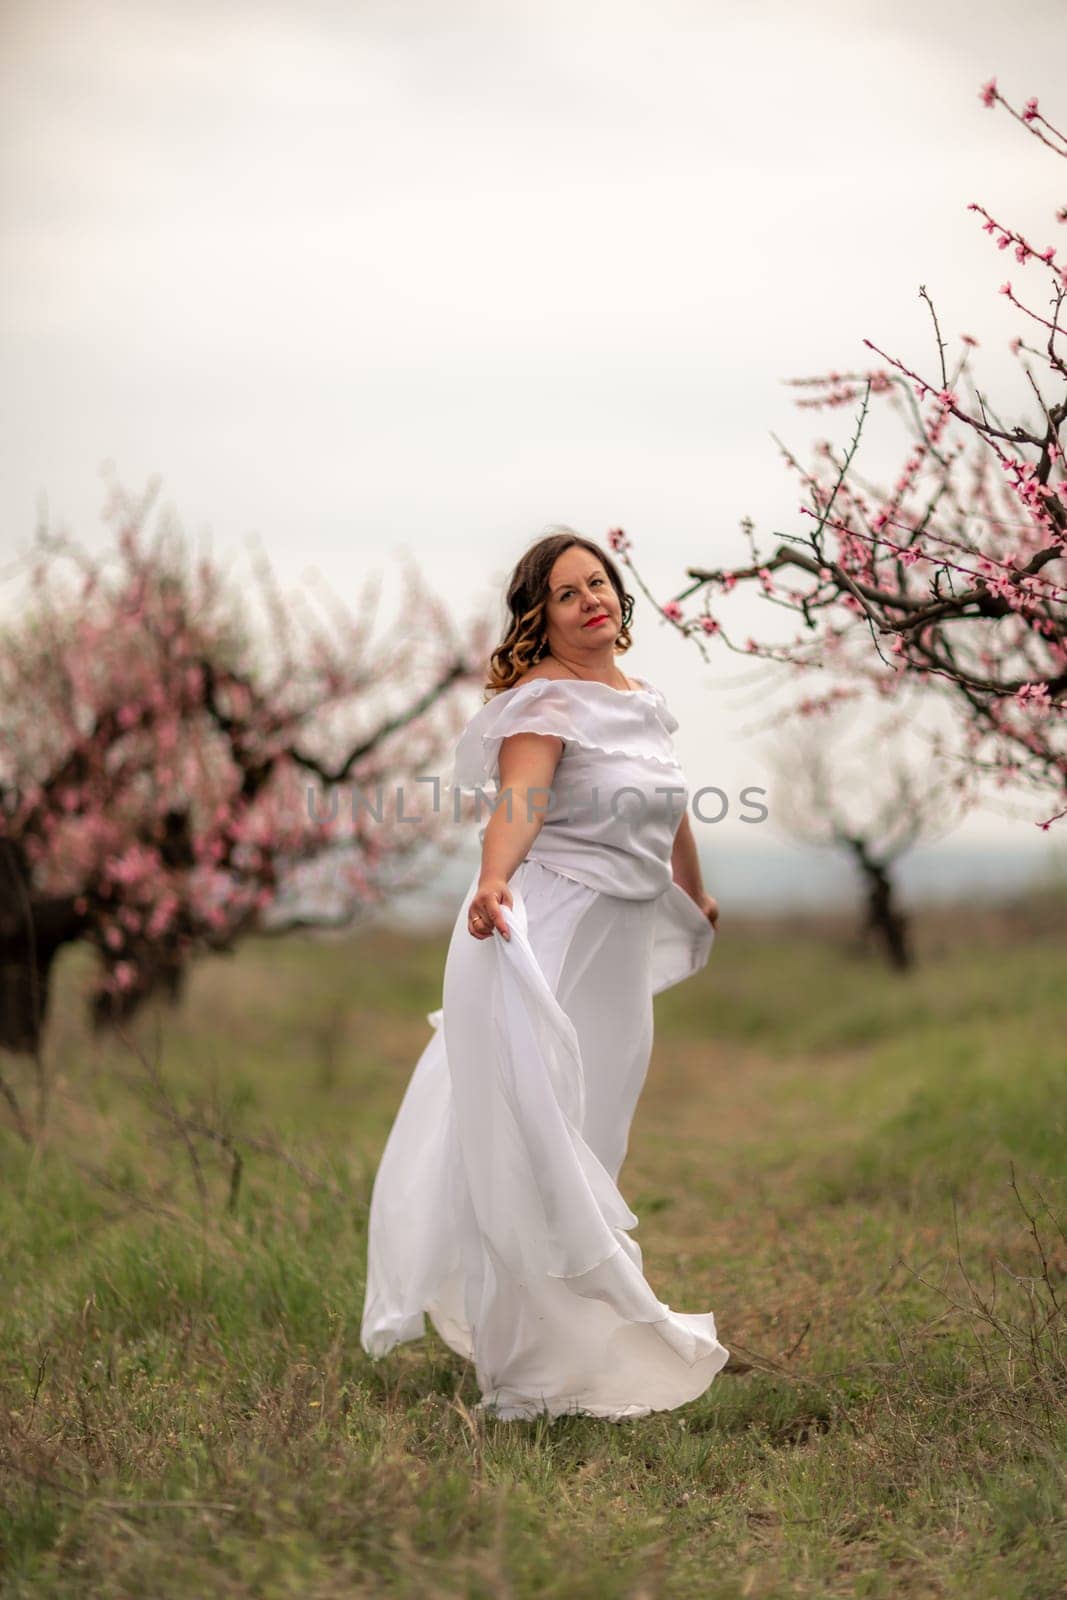 Woman peach blossom. Happy woman in white dress walking in the garden of blossoming peach trees in spring by Matiunina